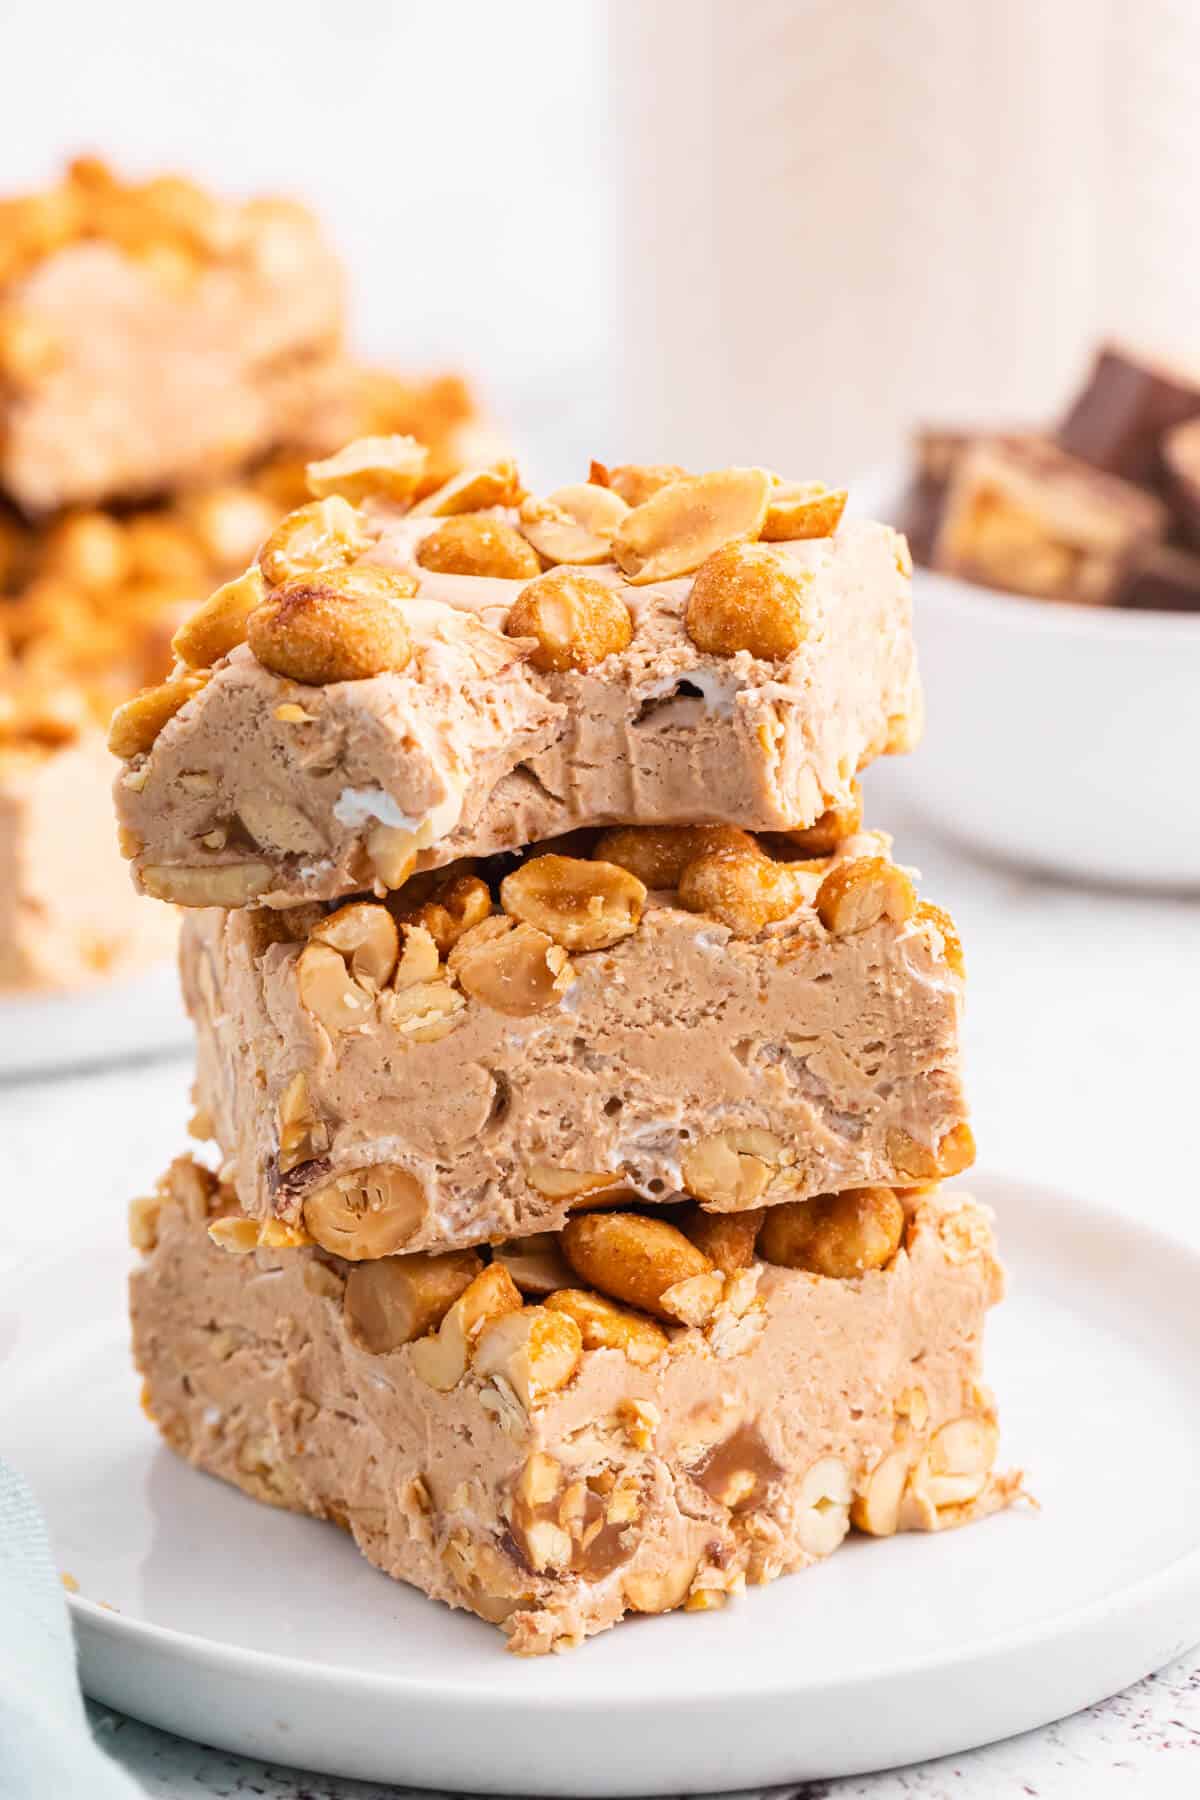 A stack of nougat bars on a plate with a bite out of the top bar.